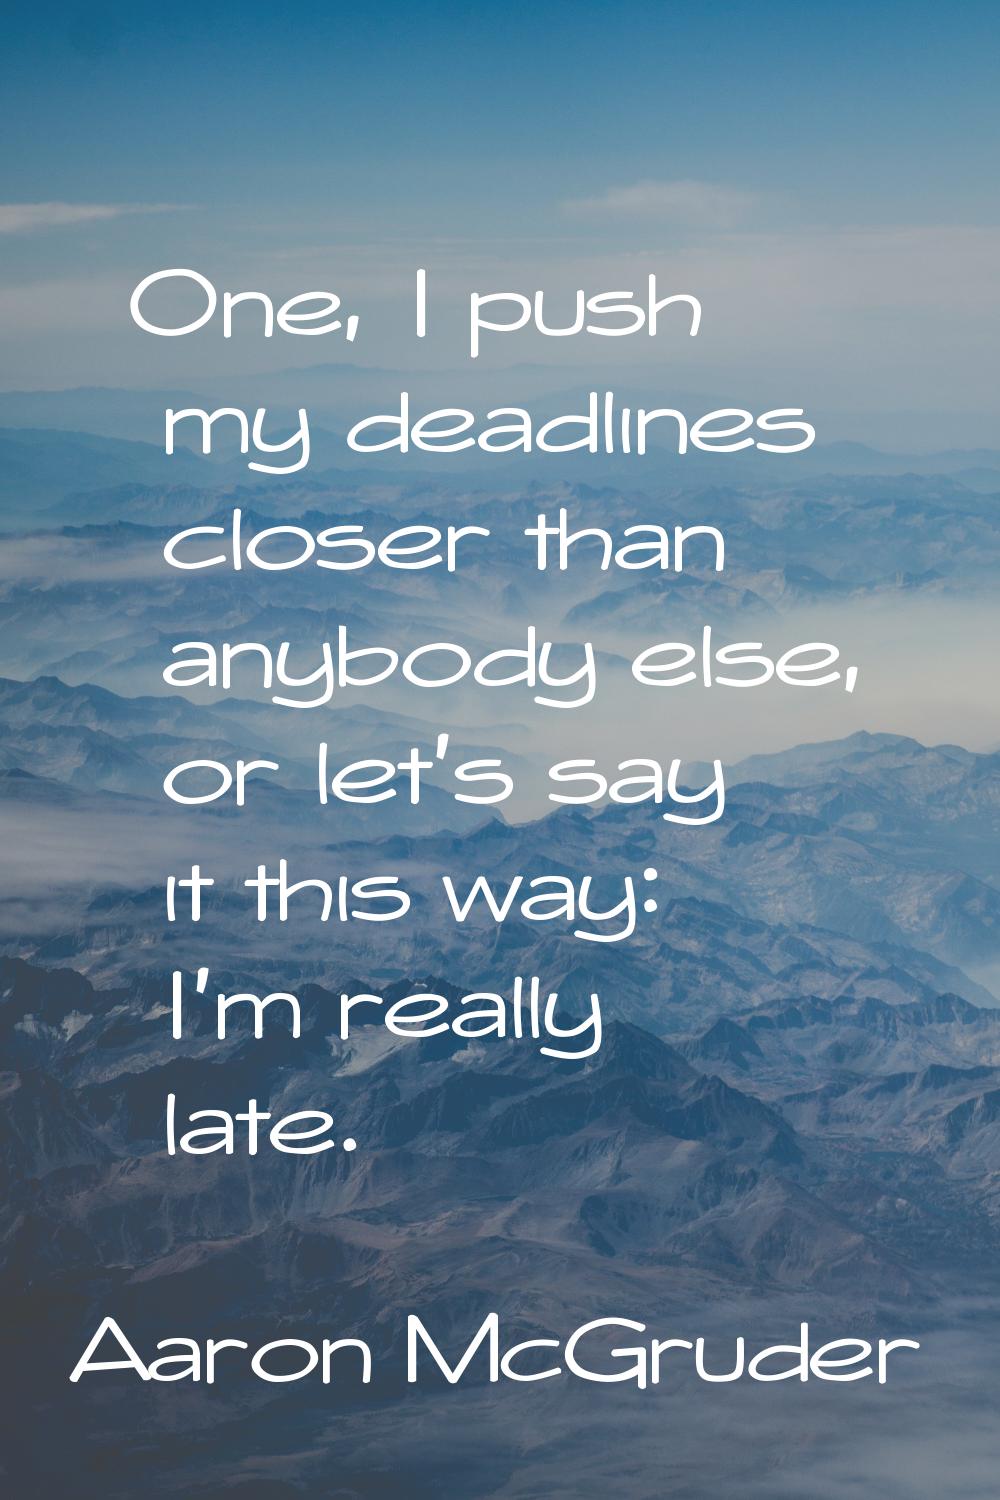 One, I push my deadlines closer than anybody else, or let's say it this way: I'm really late.